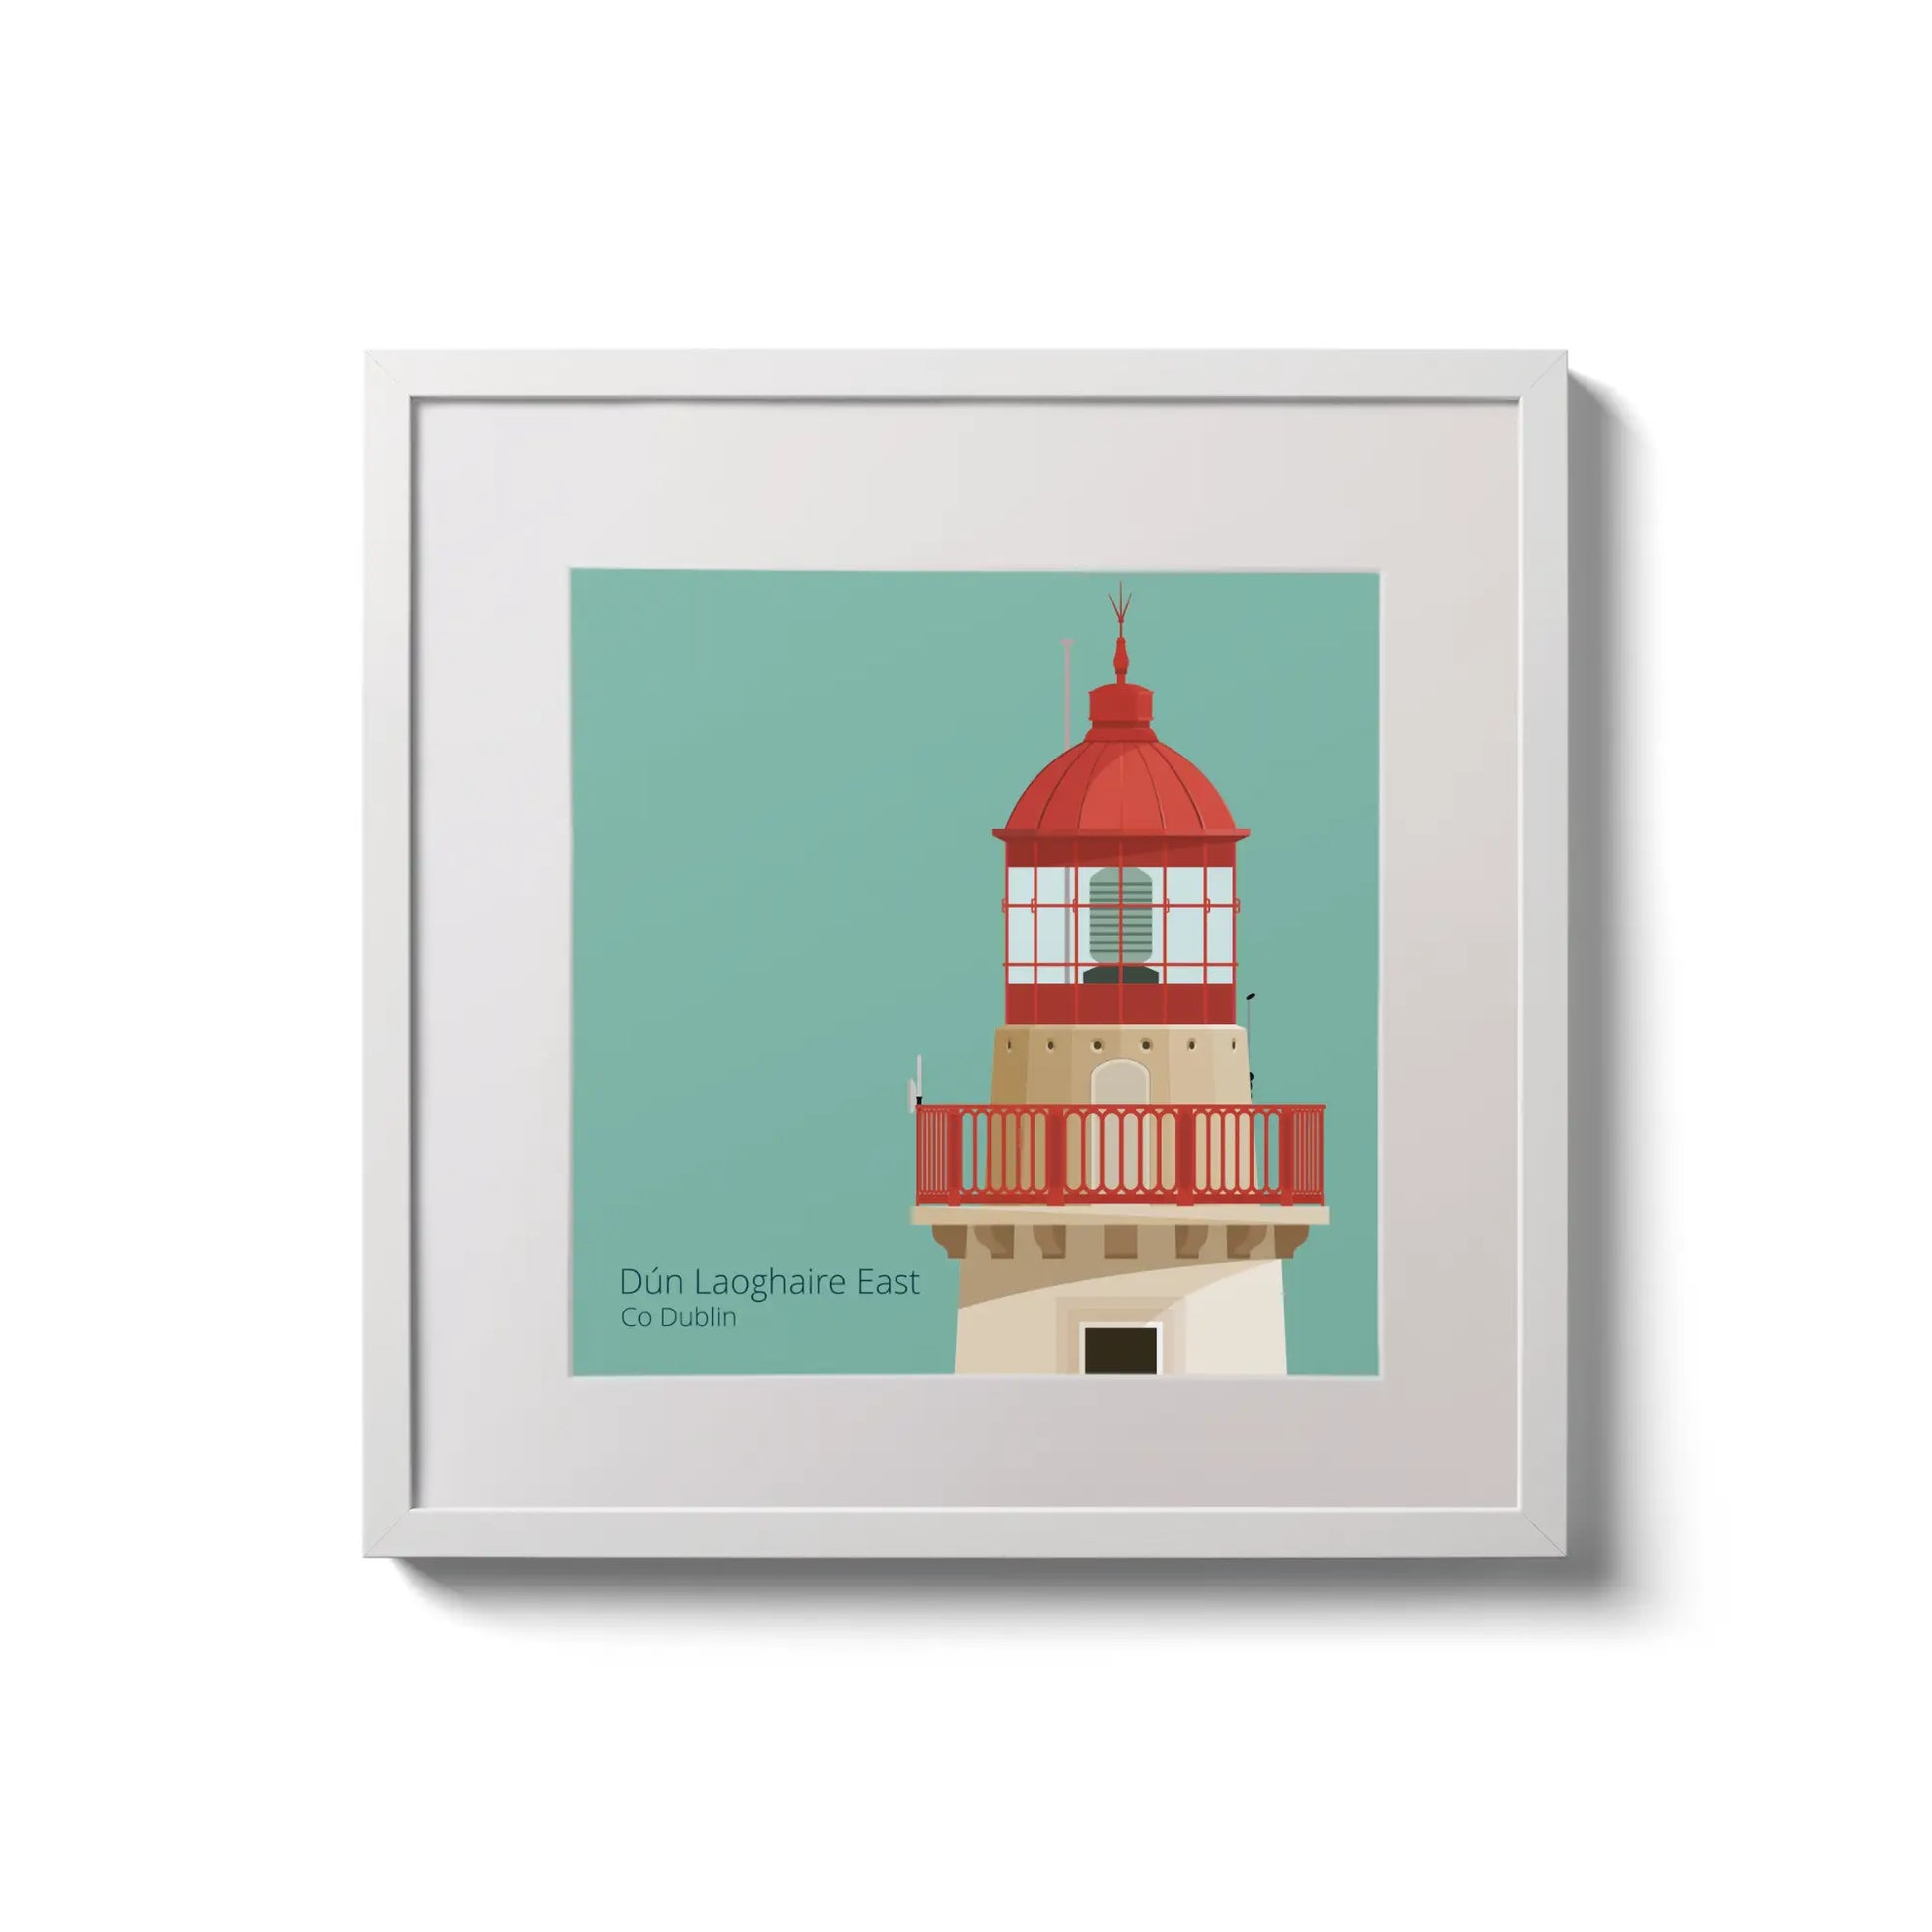 Illustration of Dún Laoghaire East lighthouse on an ocean green background,  in a white square frame measuring 20x20cm.